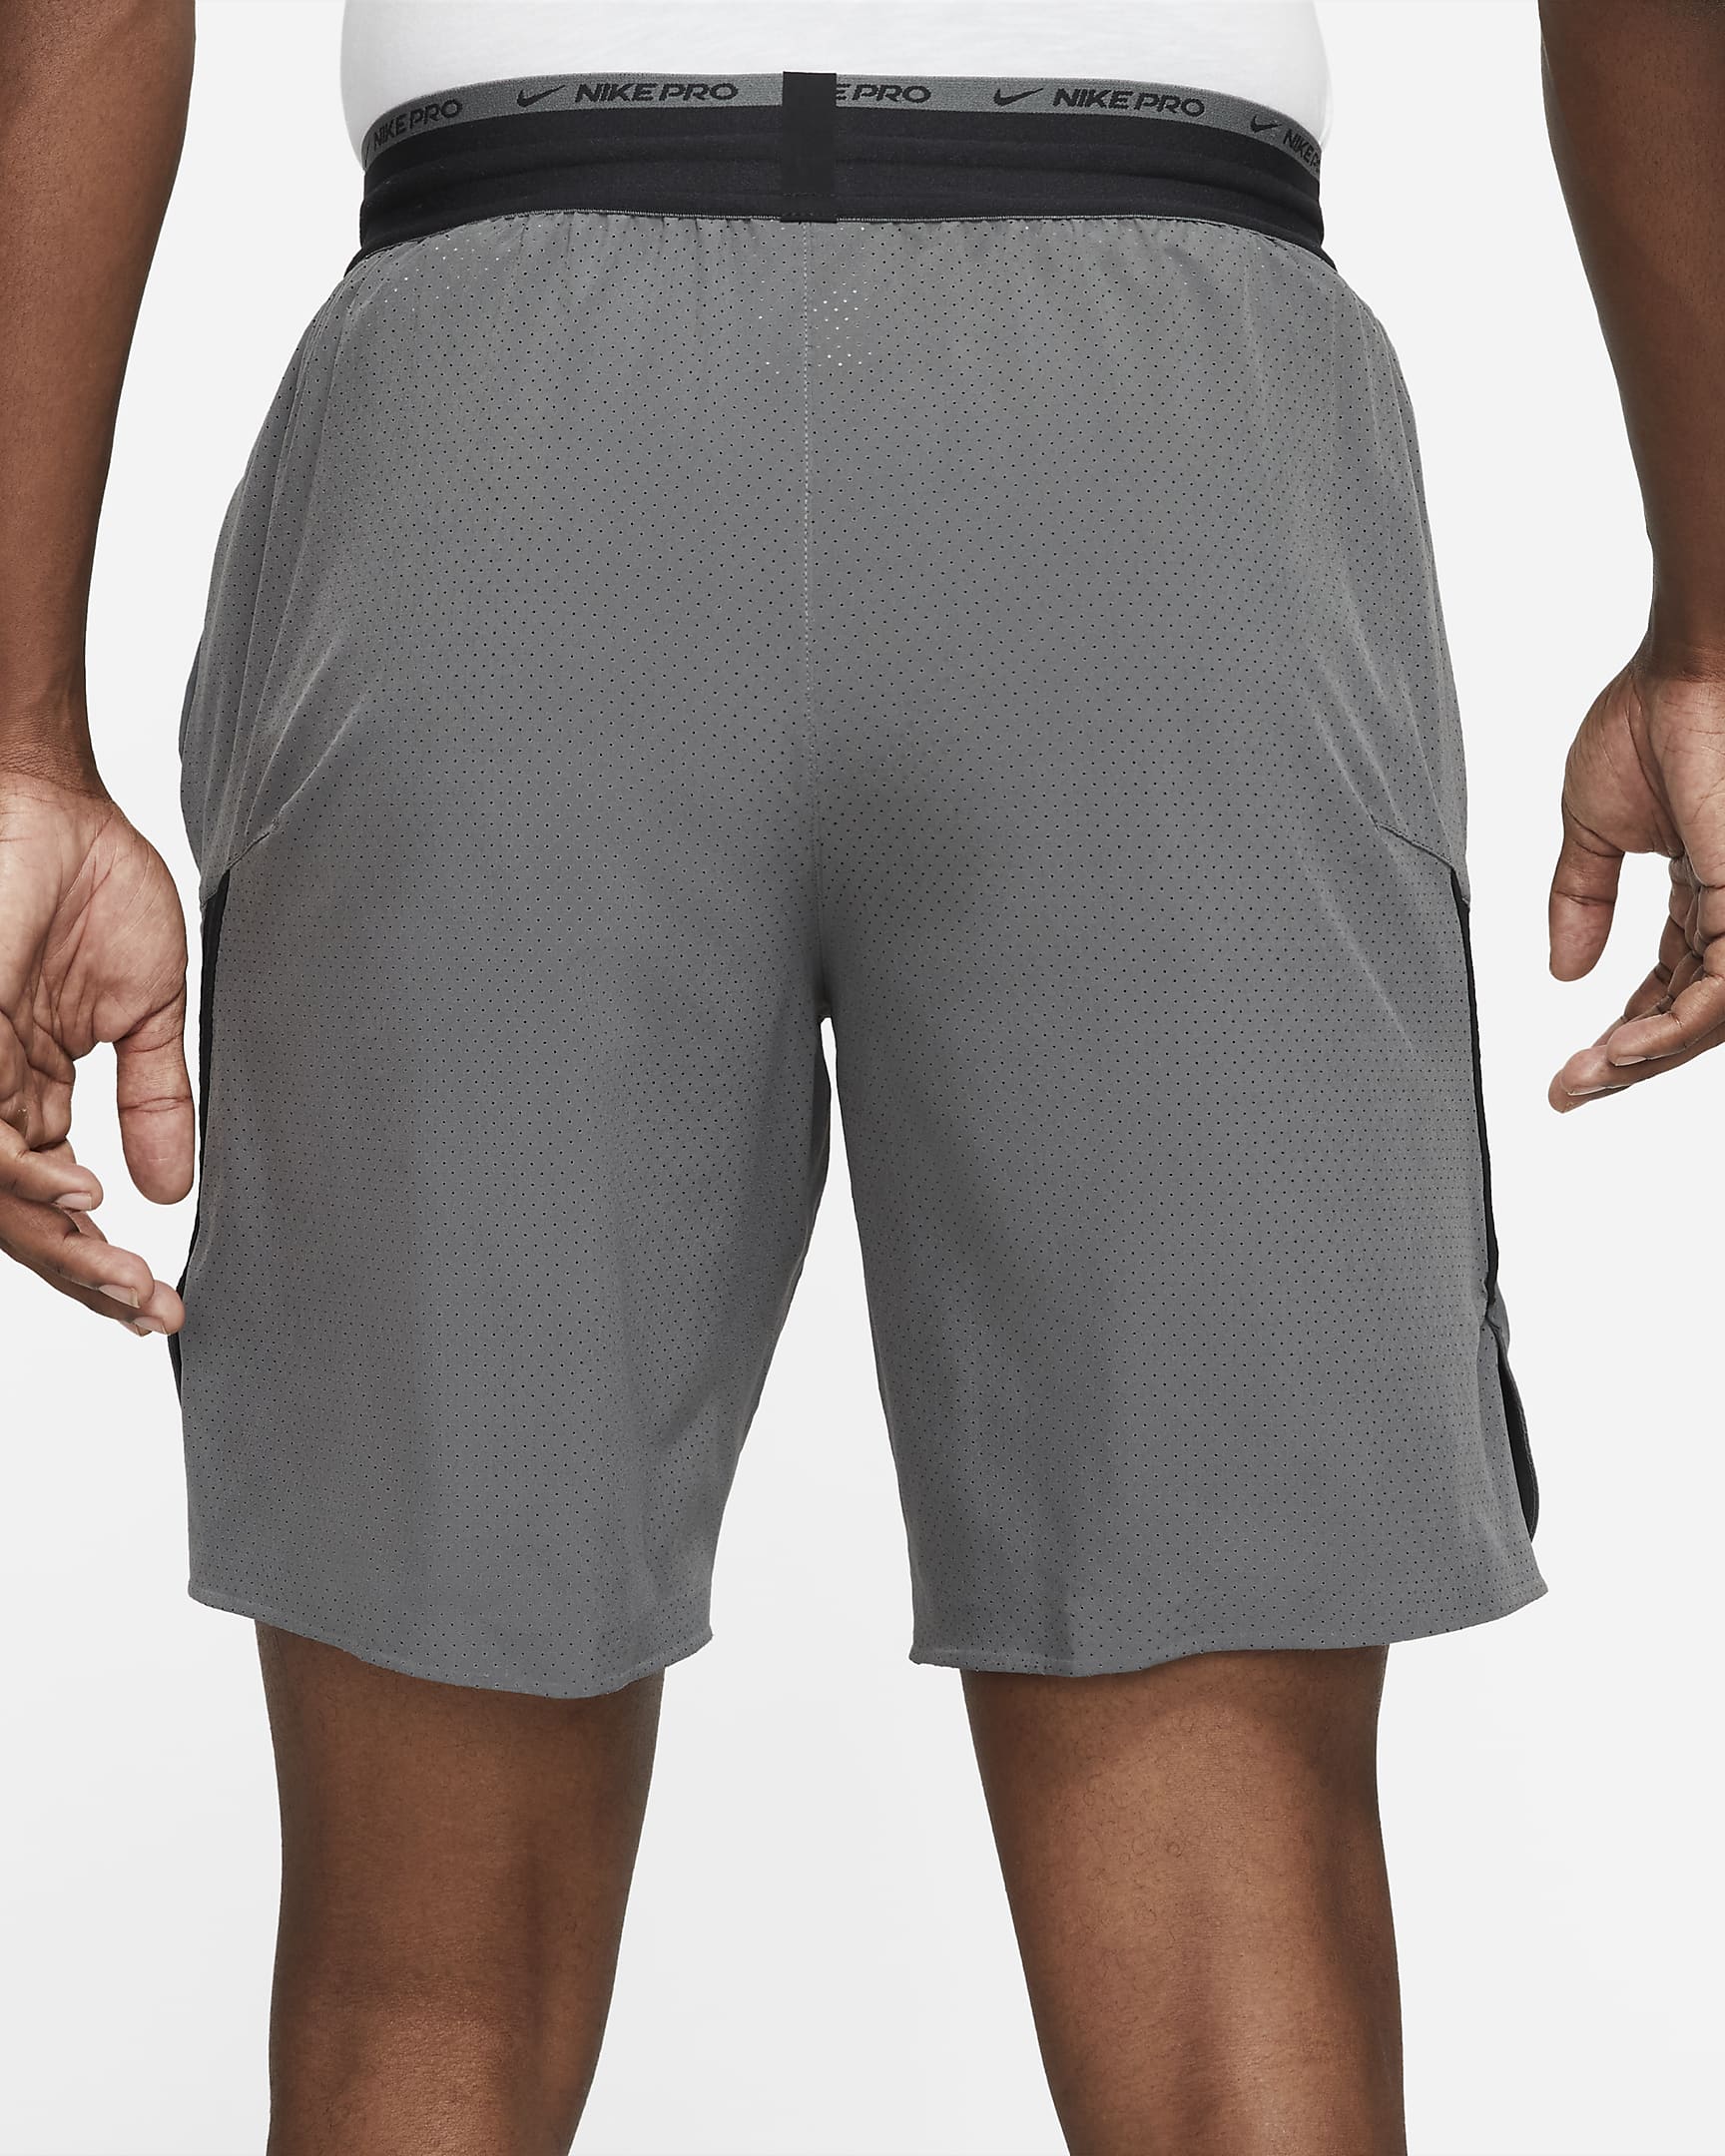 Nike Dri-FIT Flex Rep Pro Collection Men's 20cm (approx.) Unlined Training Shorts - Iron Grey/Black